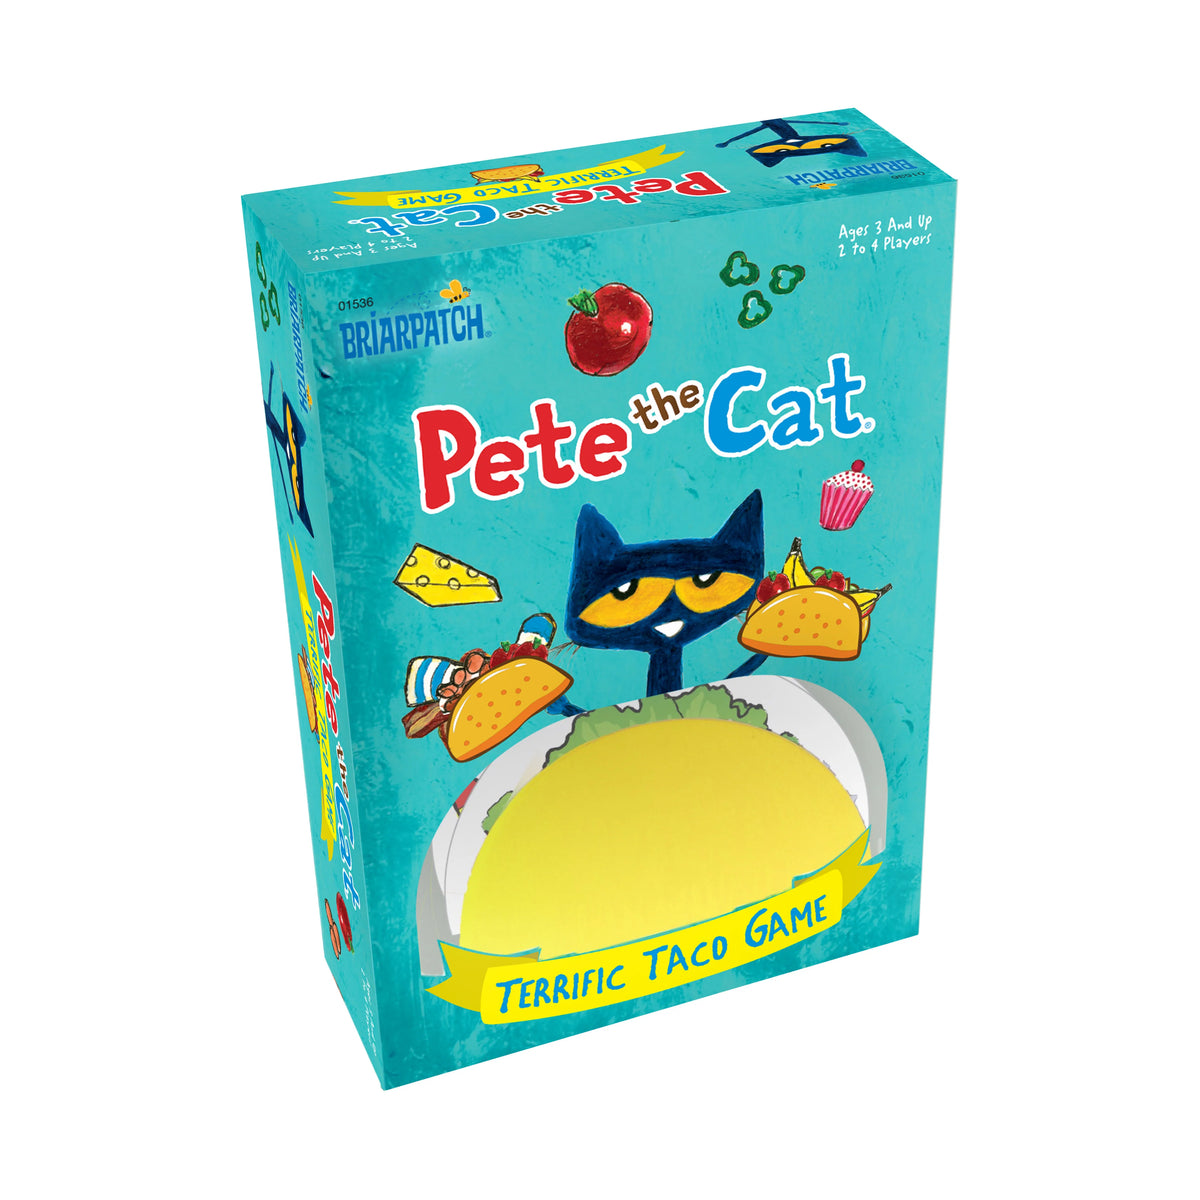 Pete the Cat Terrific Tacos Game Cover